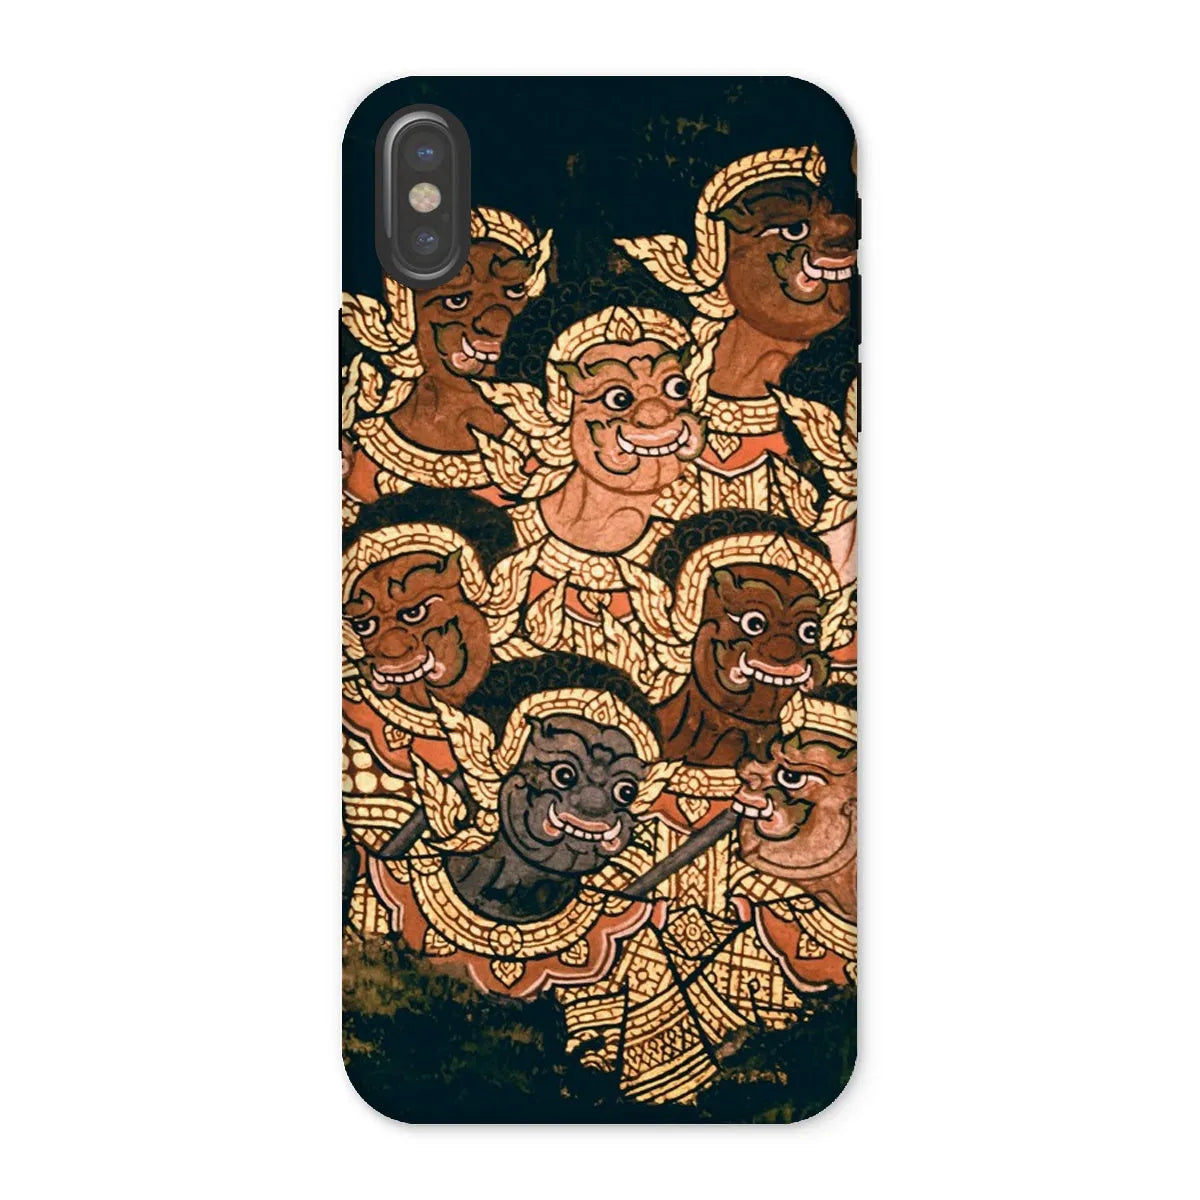 Babes In The Woods - Thailand Aesthetic Art Phone Case - Iphone x / Matte - Mobile Phone Cases - Aesthetic Art